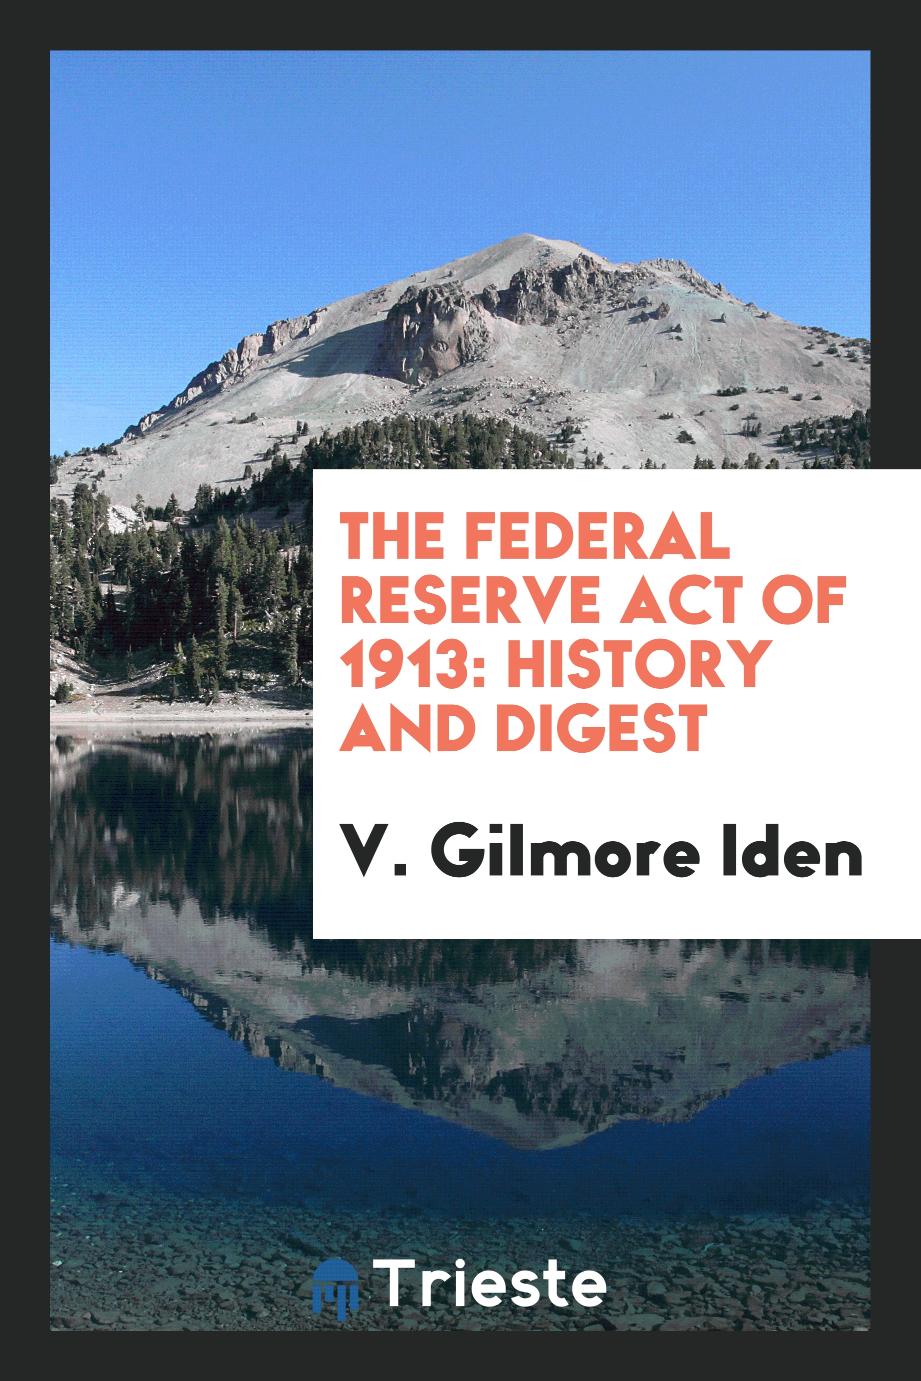 The Federal Reserve Act of 1913: History and Digest